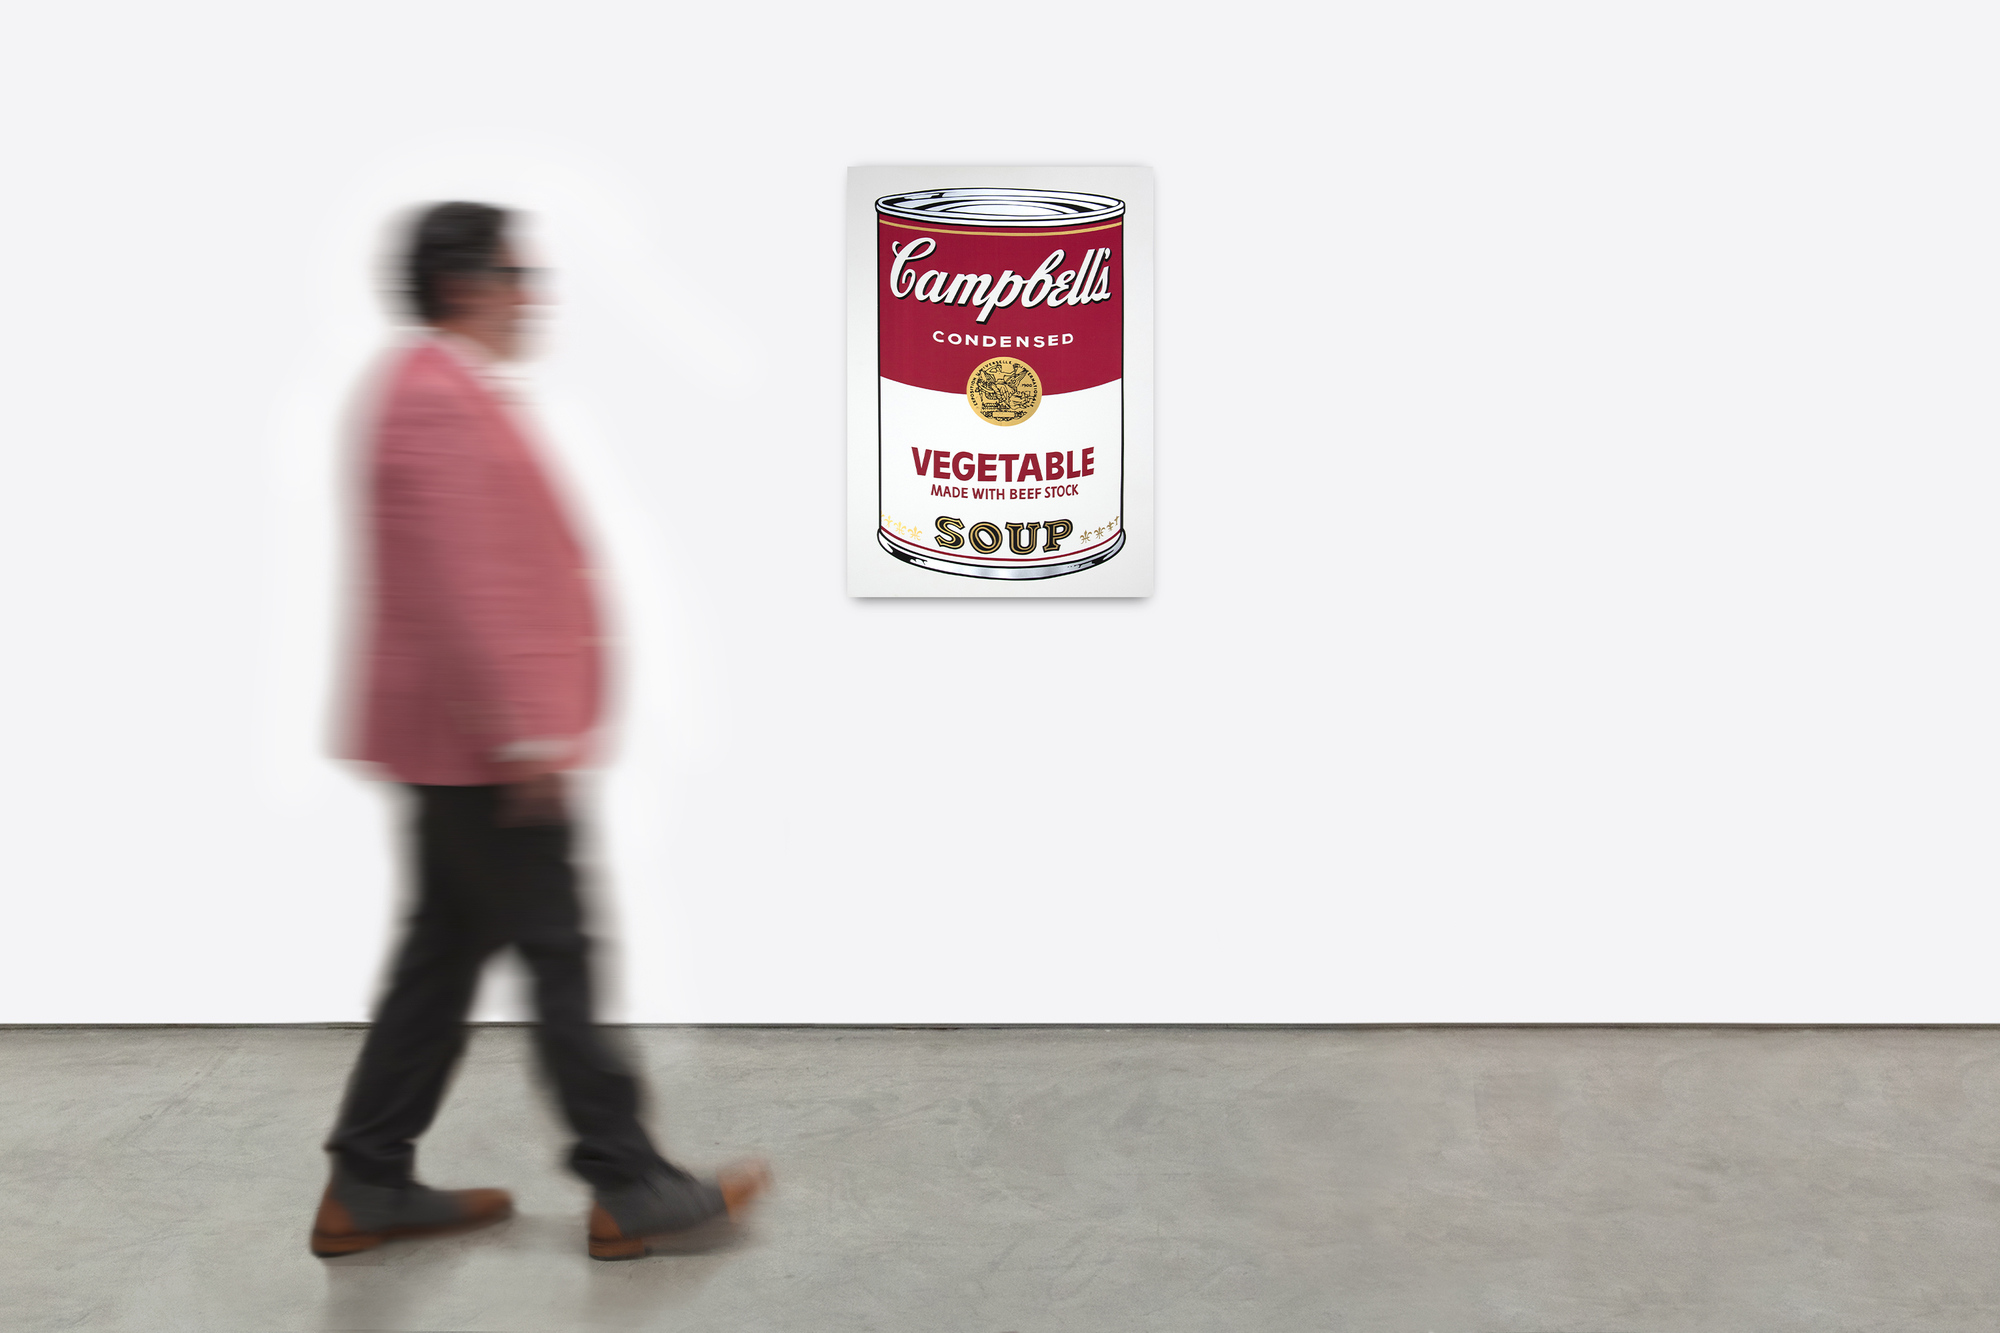 It is remarkable the speed with which the art world embraced Andy Warhol after July 1962 when his paintings of thirty-six paintings of Campbell's Soup Cans were displayed at The Ferus Gallery in Los Angeles. Among his last hand-painted works, Warhol soon discovered silkscreen, the medium with which he is most closely associated. Whereas the handcrafted soup-can paintings look mechanically produced, the silkscreen was a mechanical and commercial process that enabled Warhol to produce unlimited precise repetitions and variations of key subjects. As one of the 32 original varieties, Vegetable remains a pop culture phenomenon, turning up on everything from plates and mugs to neckties, t-shirts, and surfboards.